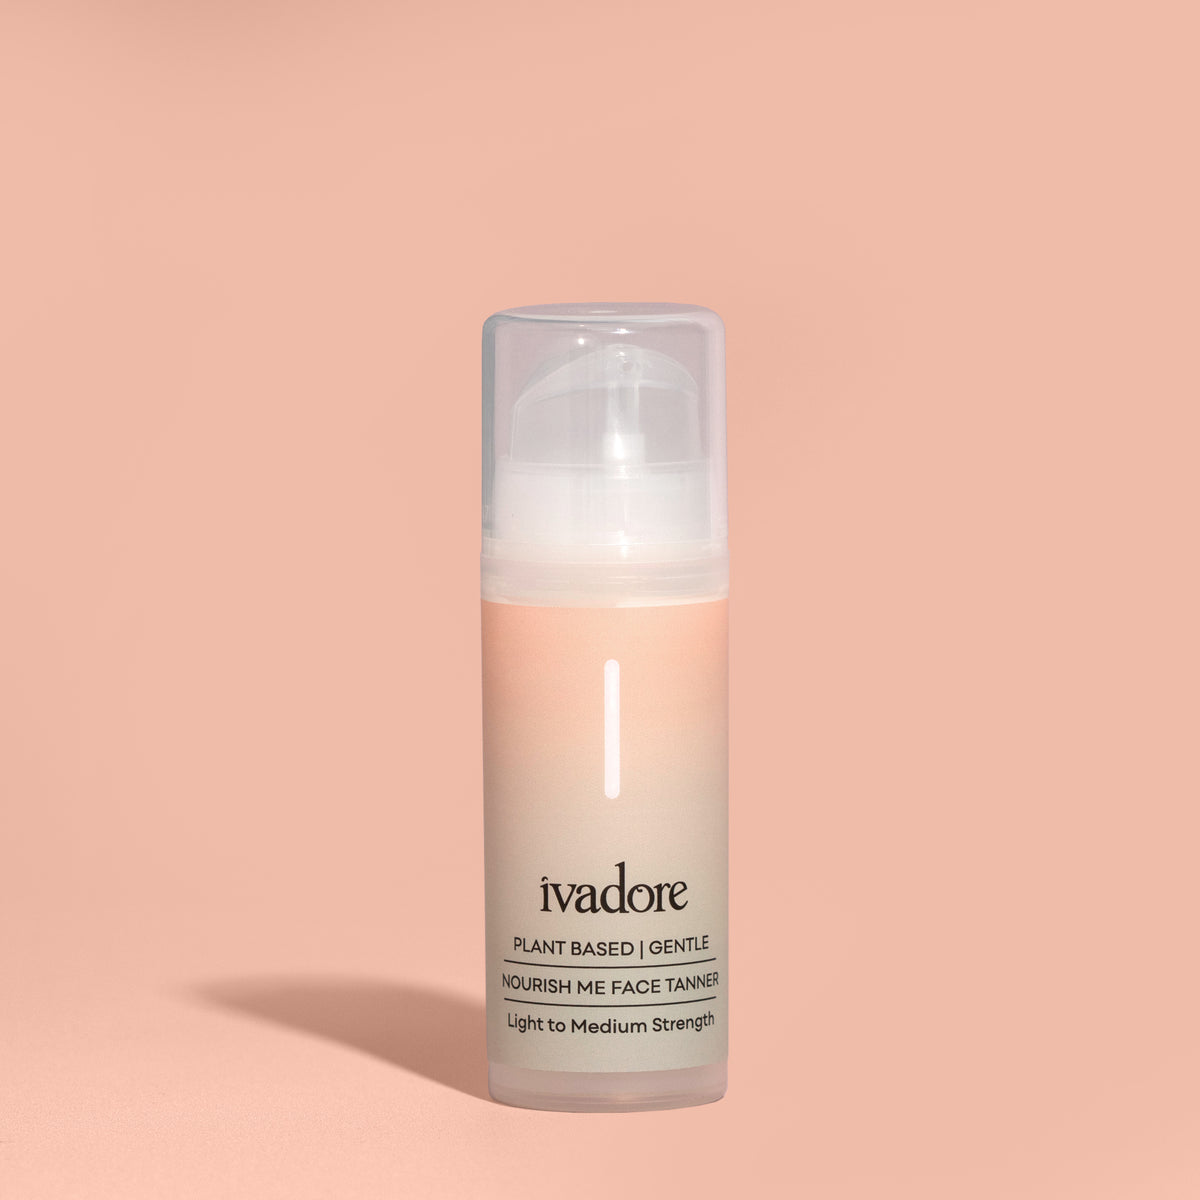 Ivadore face tan bottle on peach coloured background